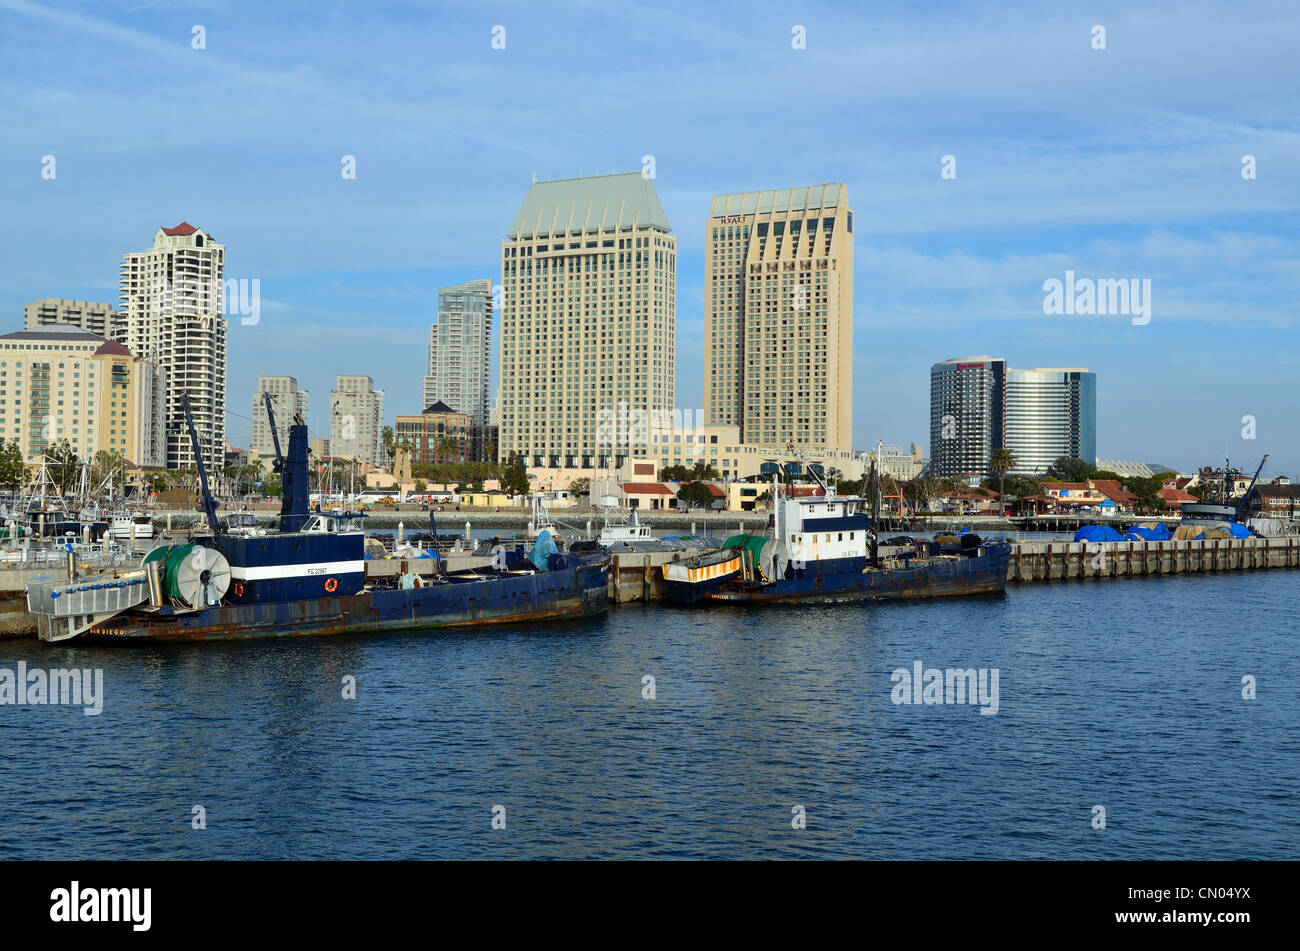 Skyscrapers in the water front. San Diego, California, USA. Stock Photo